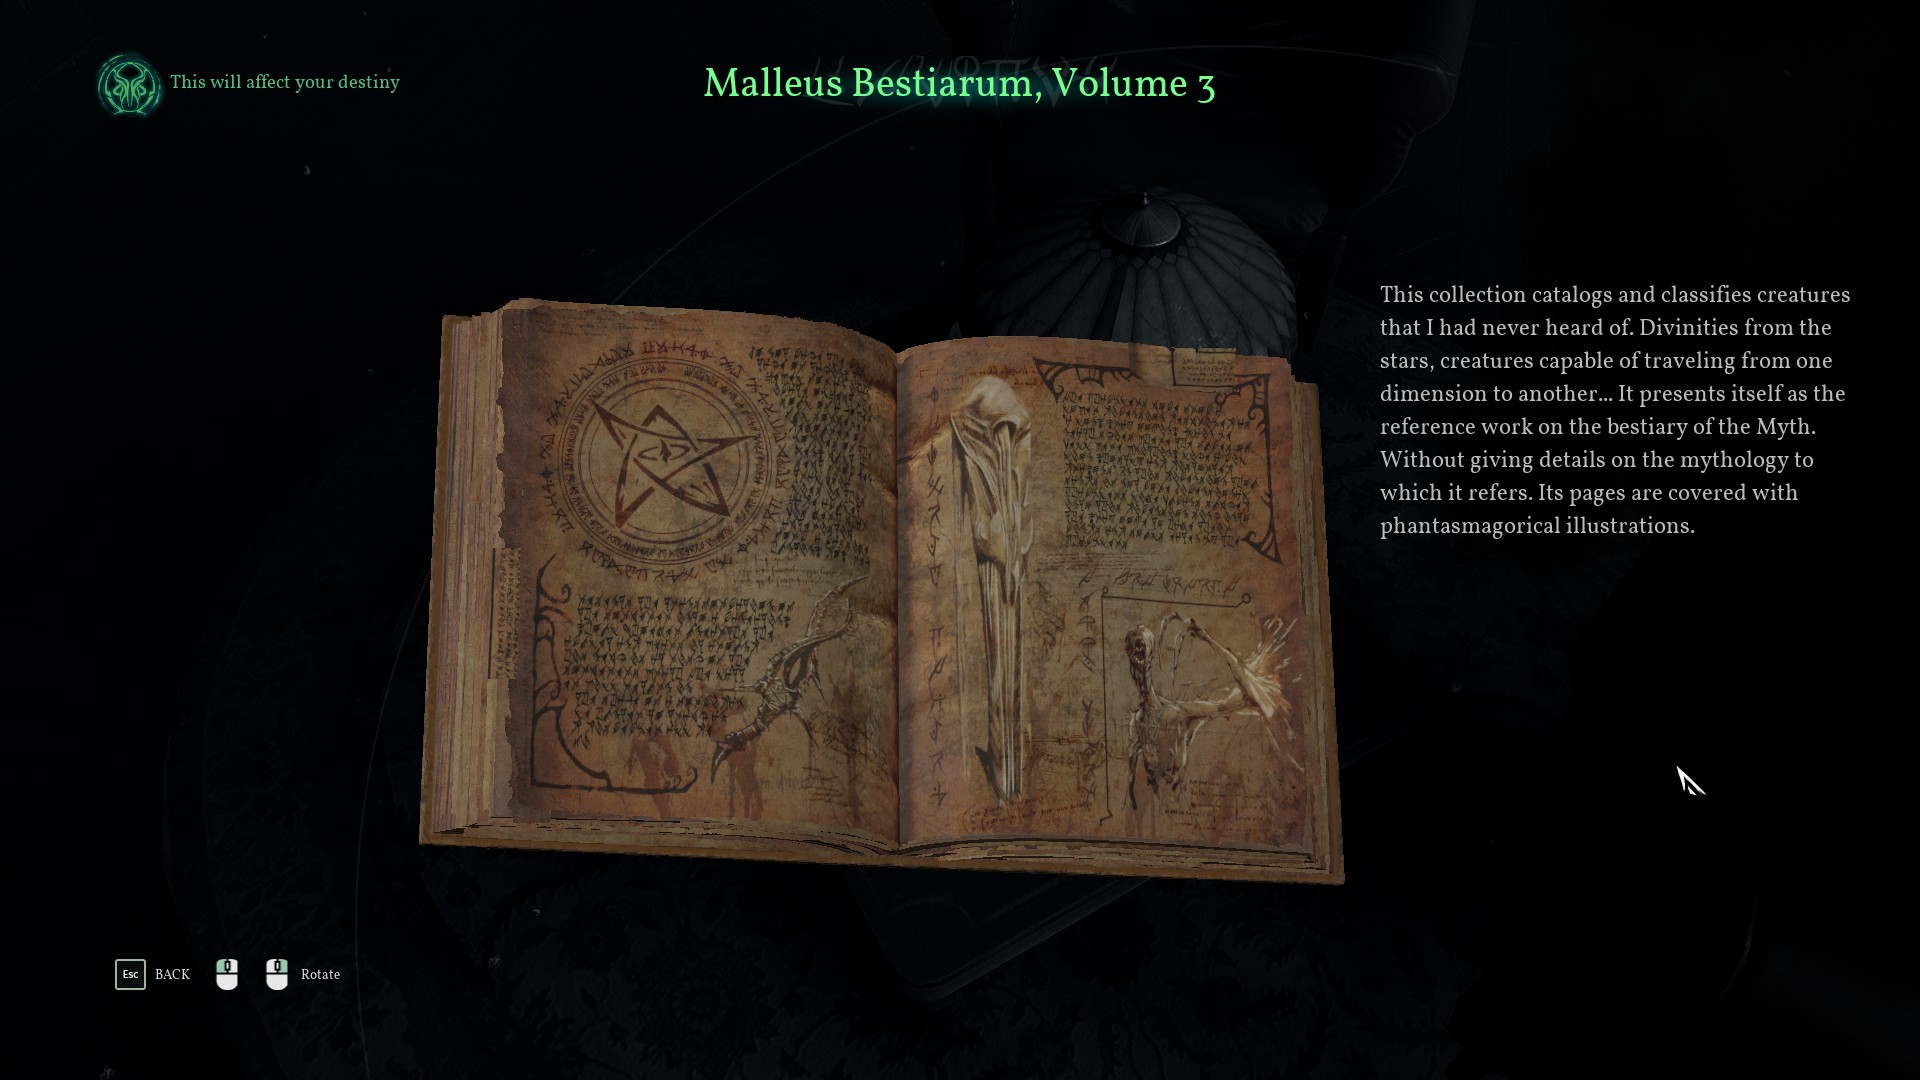 Call of Cthulhu Detailed Information About R’lyehian (Cthuvian) Texts and Inscriptions Guide - Malleus Bestiarum Vol. 3 - 4DA7118